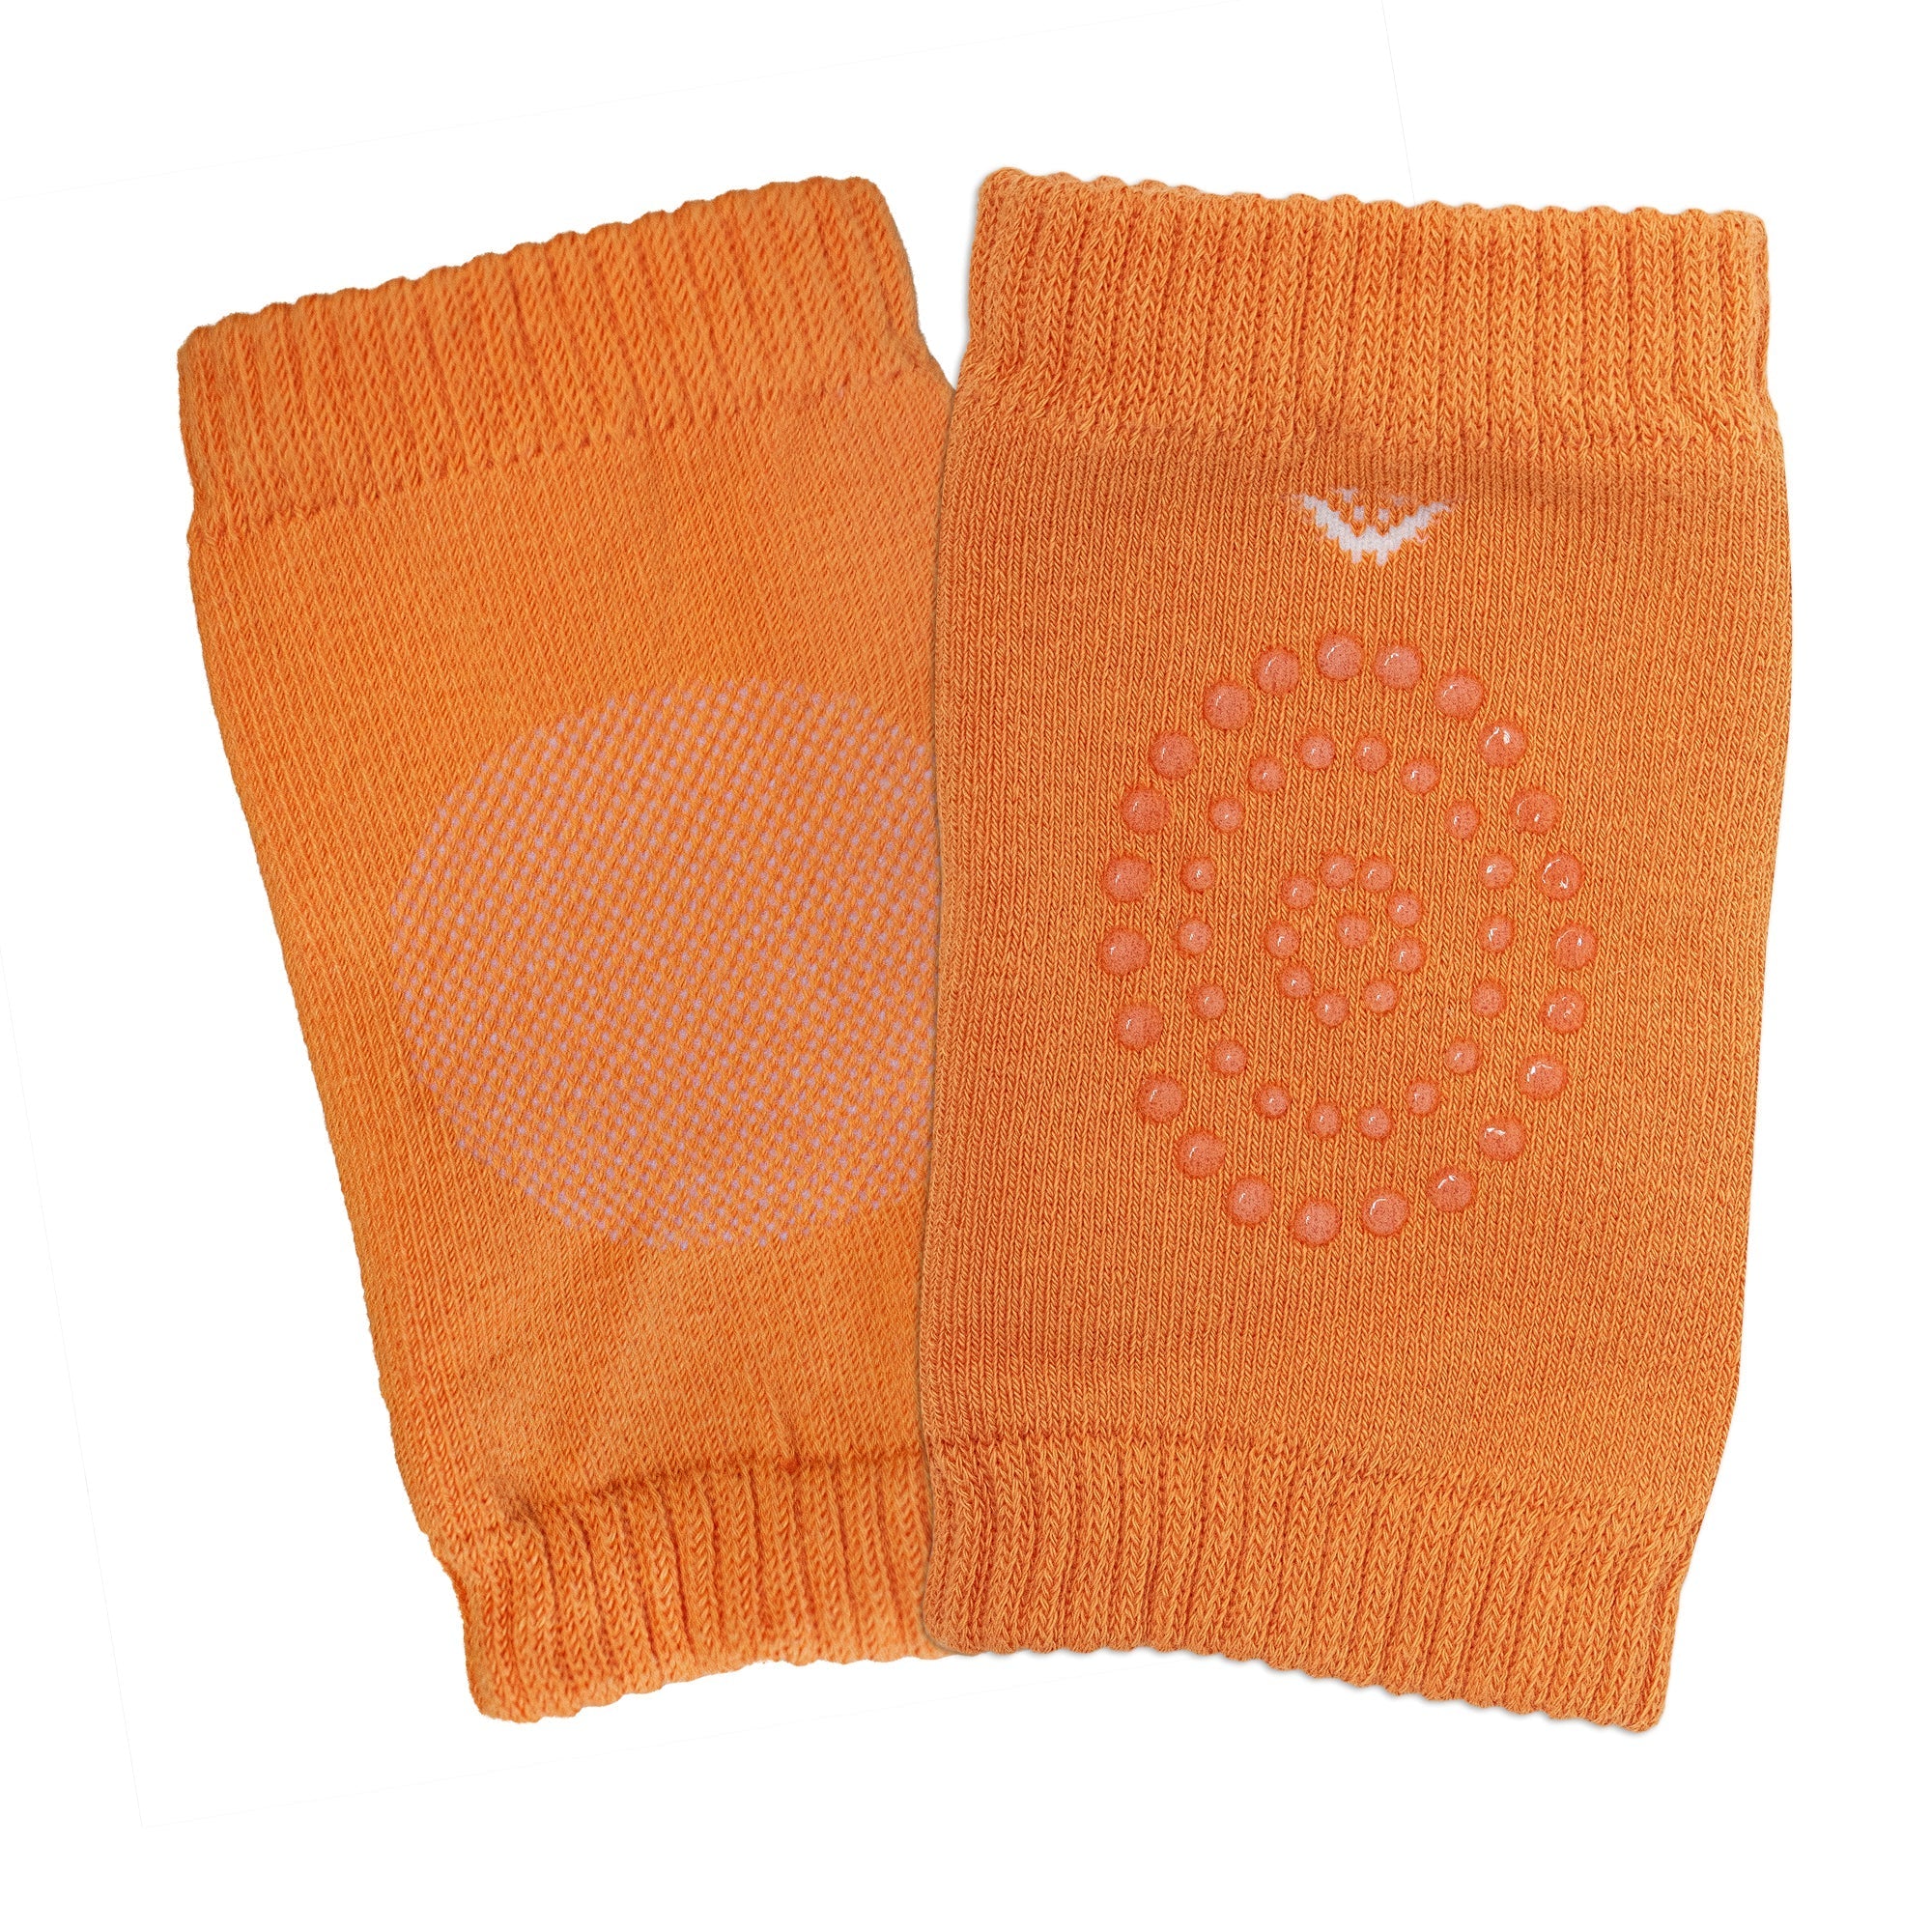 Kids Knee and Elbow Protector with Anti-Slip - Pack of 2 Pairs